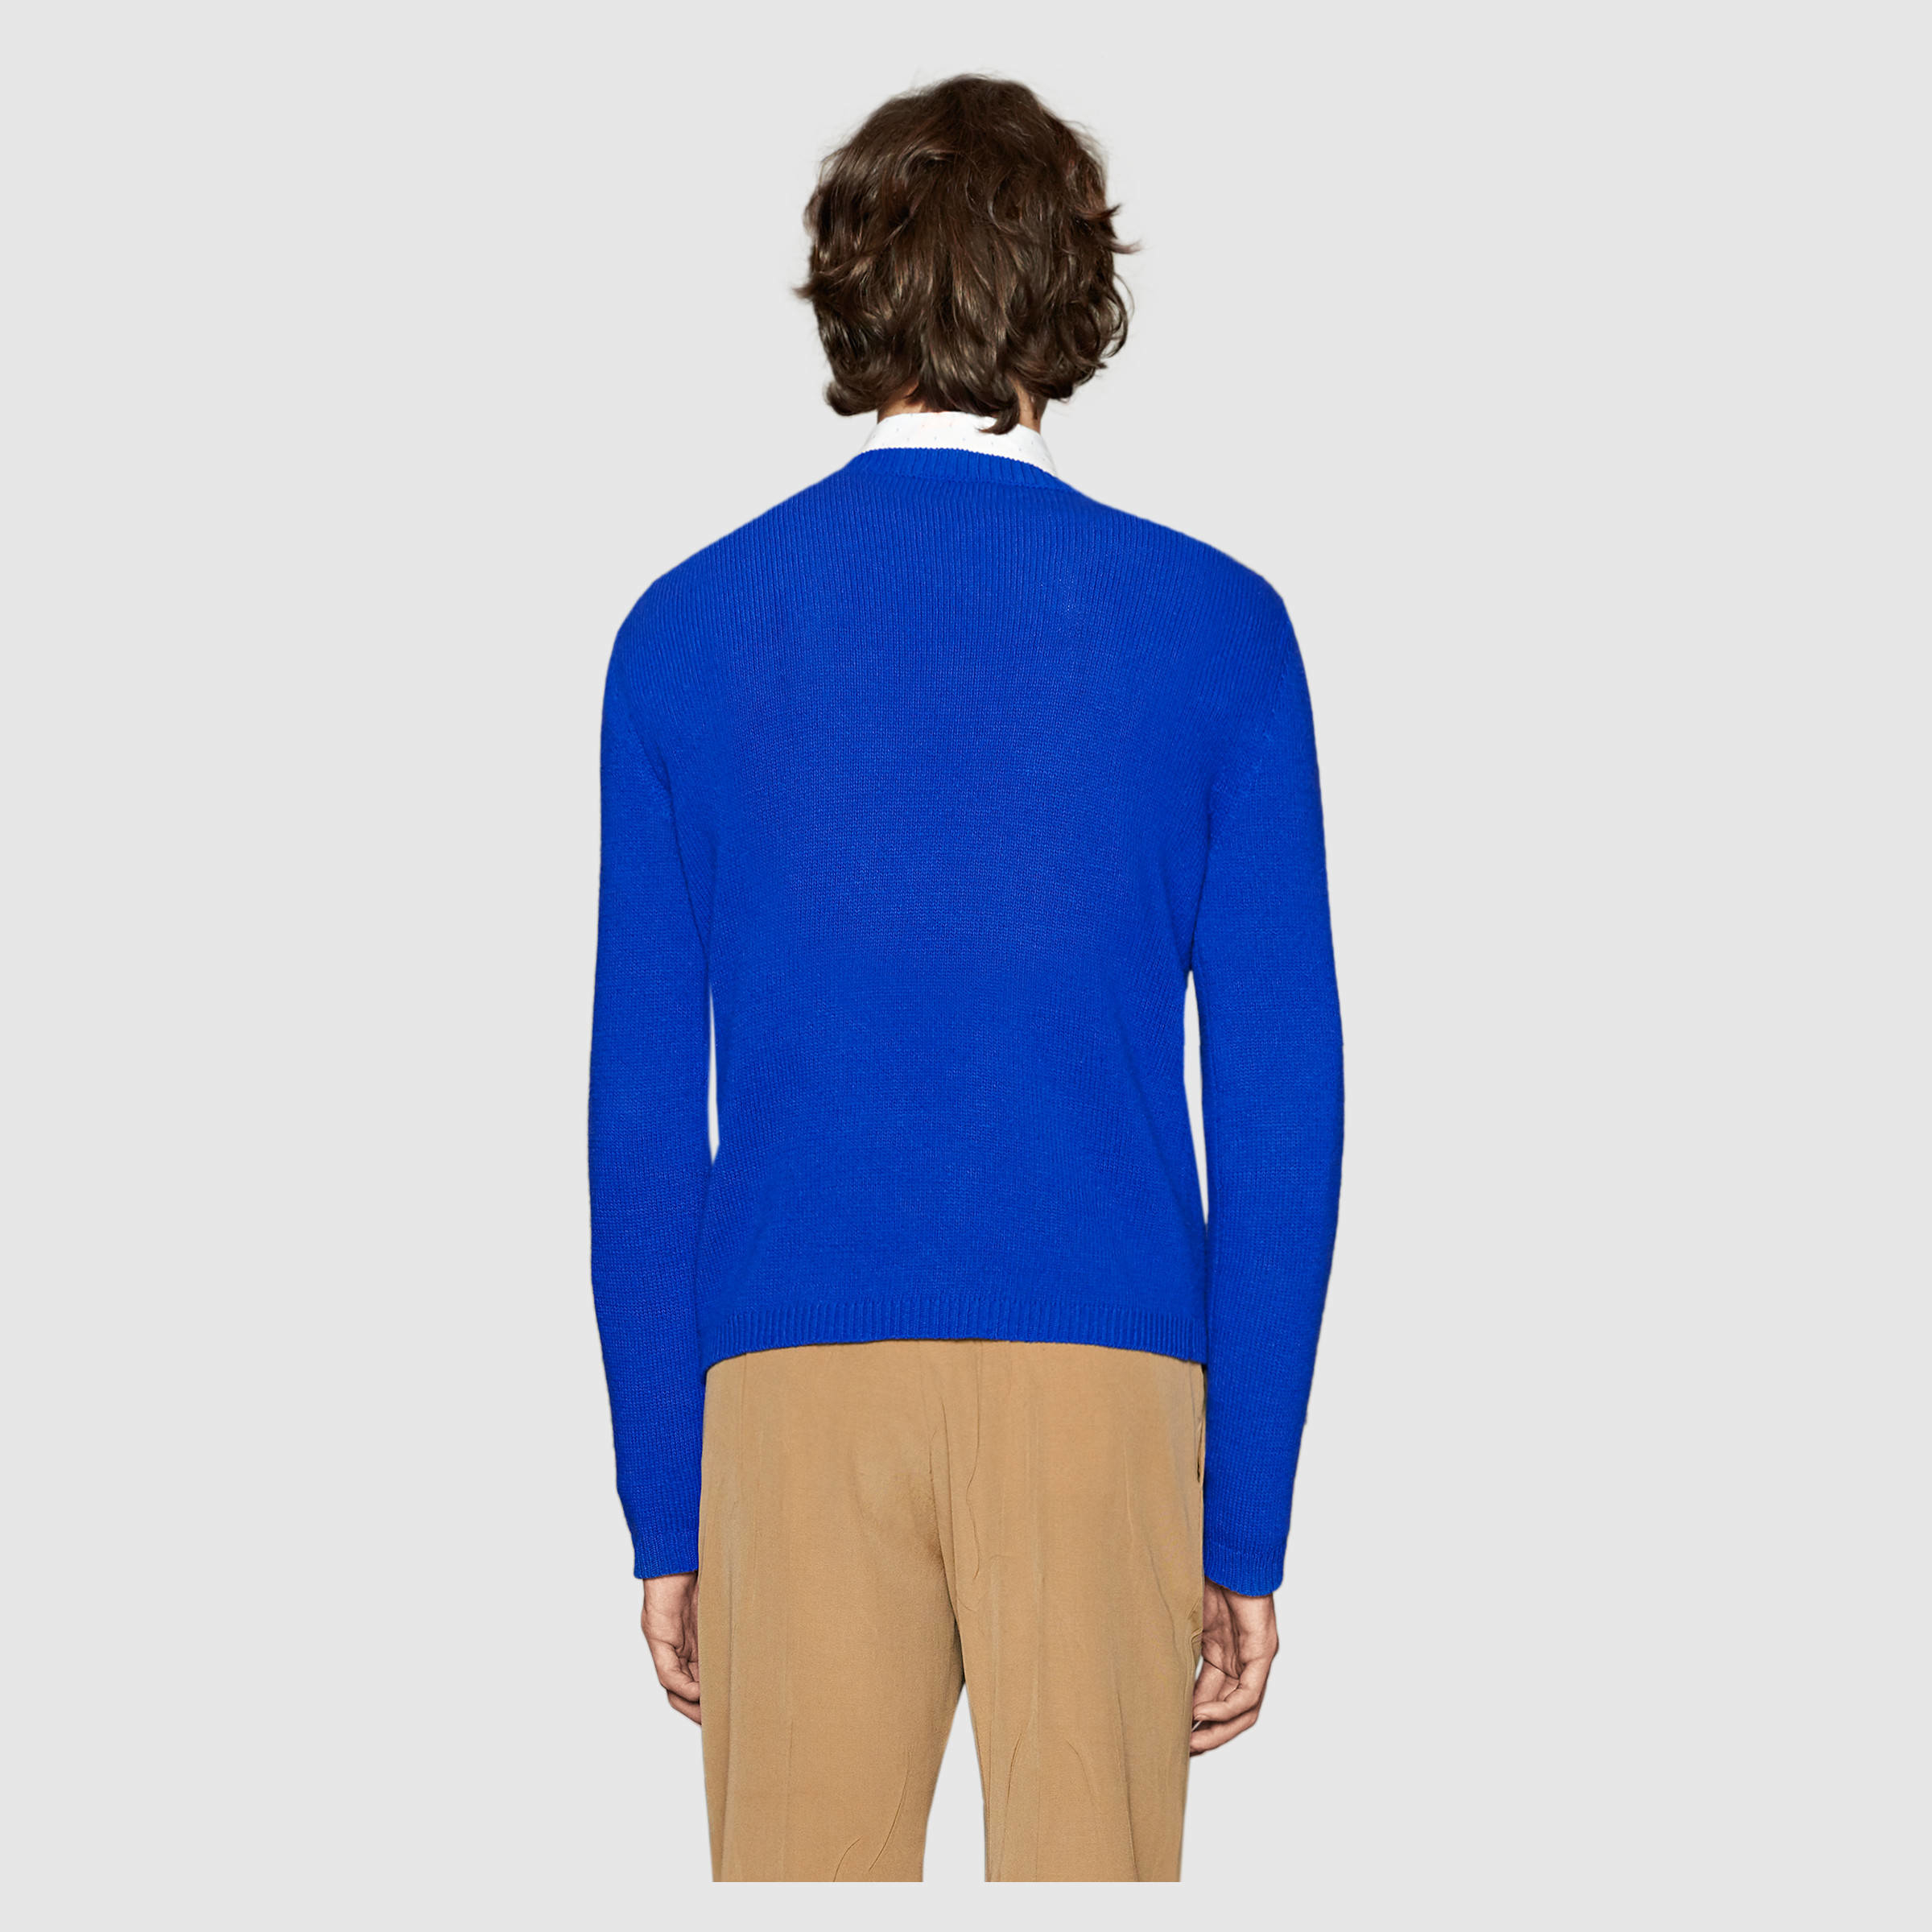 Lyst - Gucci Bee Jacquard Wool Sweater in Blue for Men